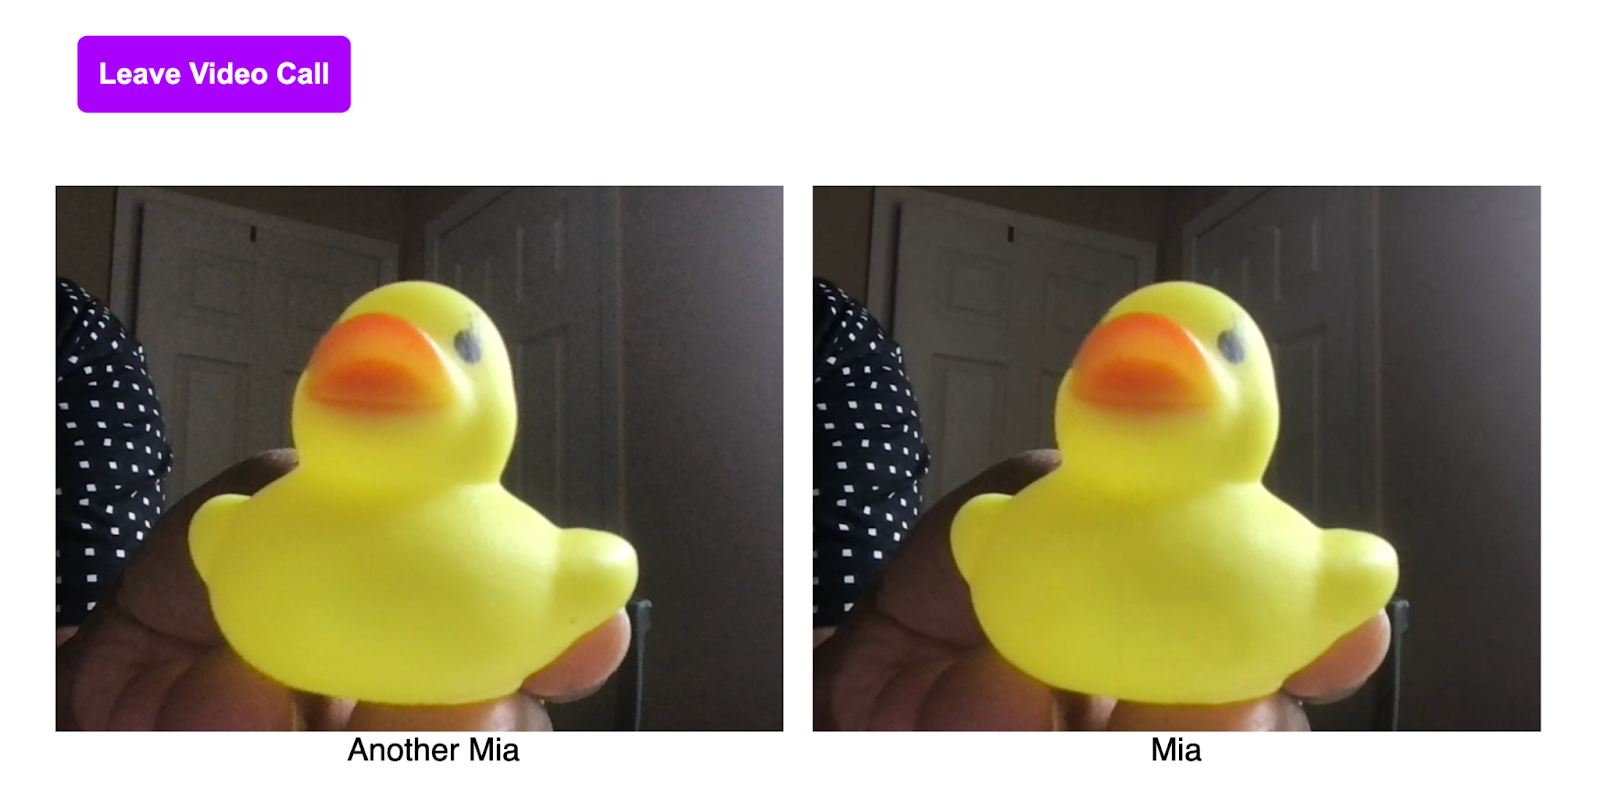 Two video feeds, one labeled "Mia" and another labeled "Another Mia." Both videos show a close-up of a yellow rubber duck.